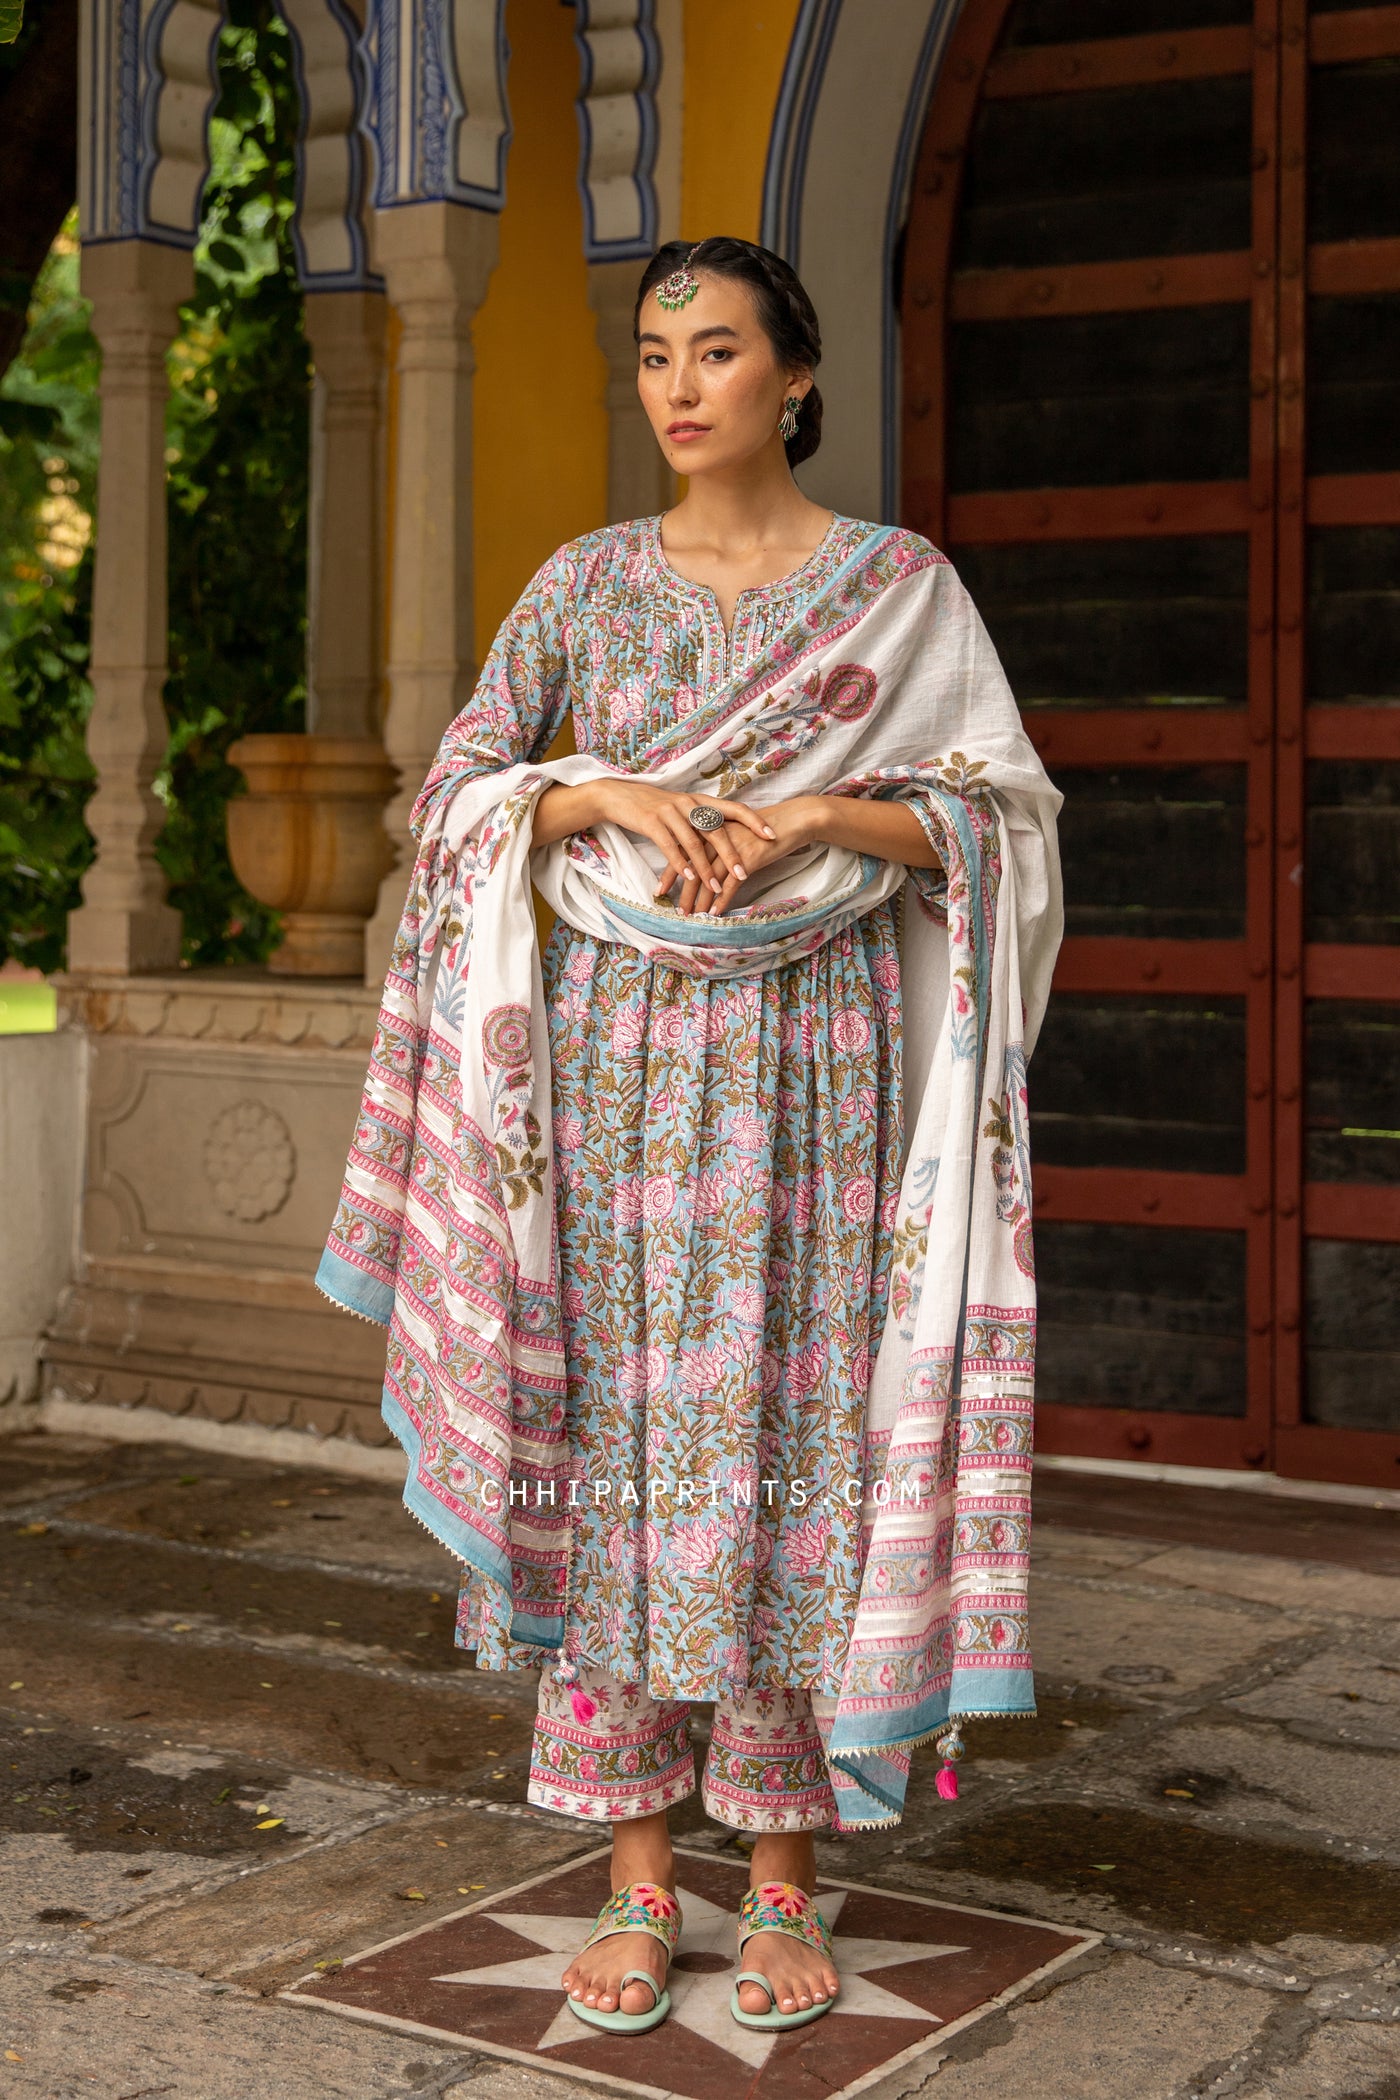 Cotton Shell Tucks Jaal Print Suit Set in Clear Sky Blue